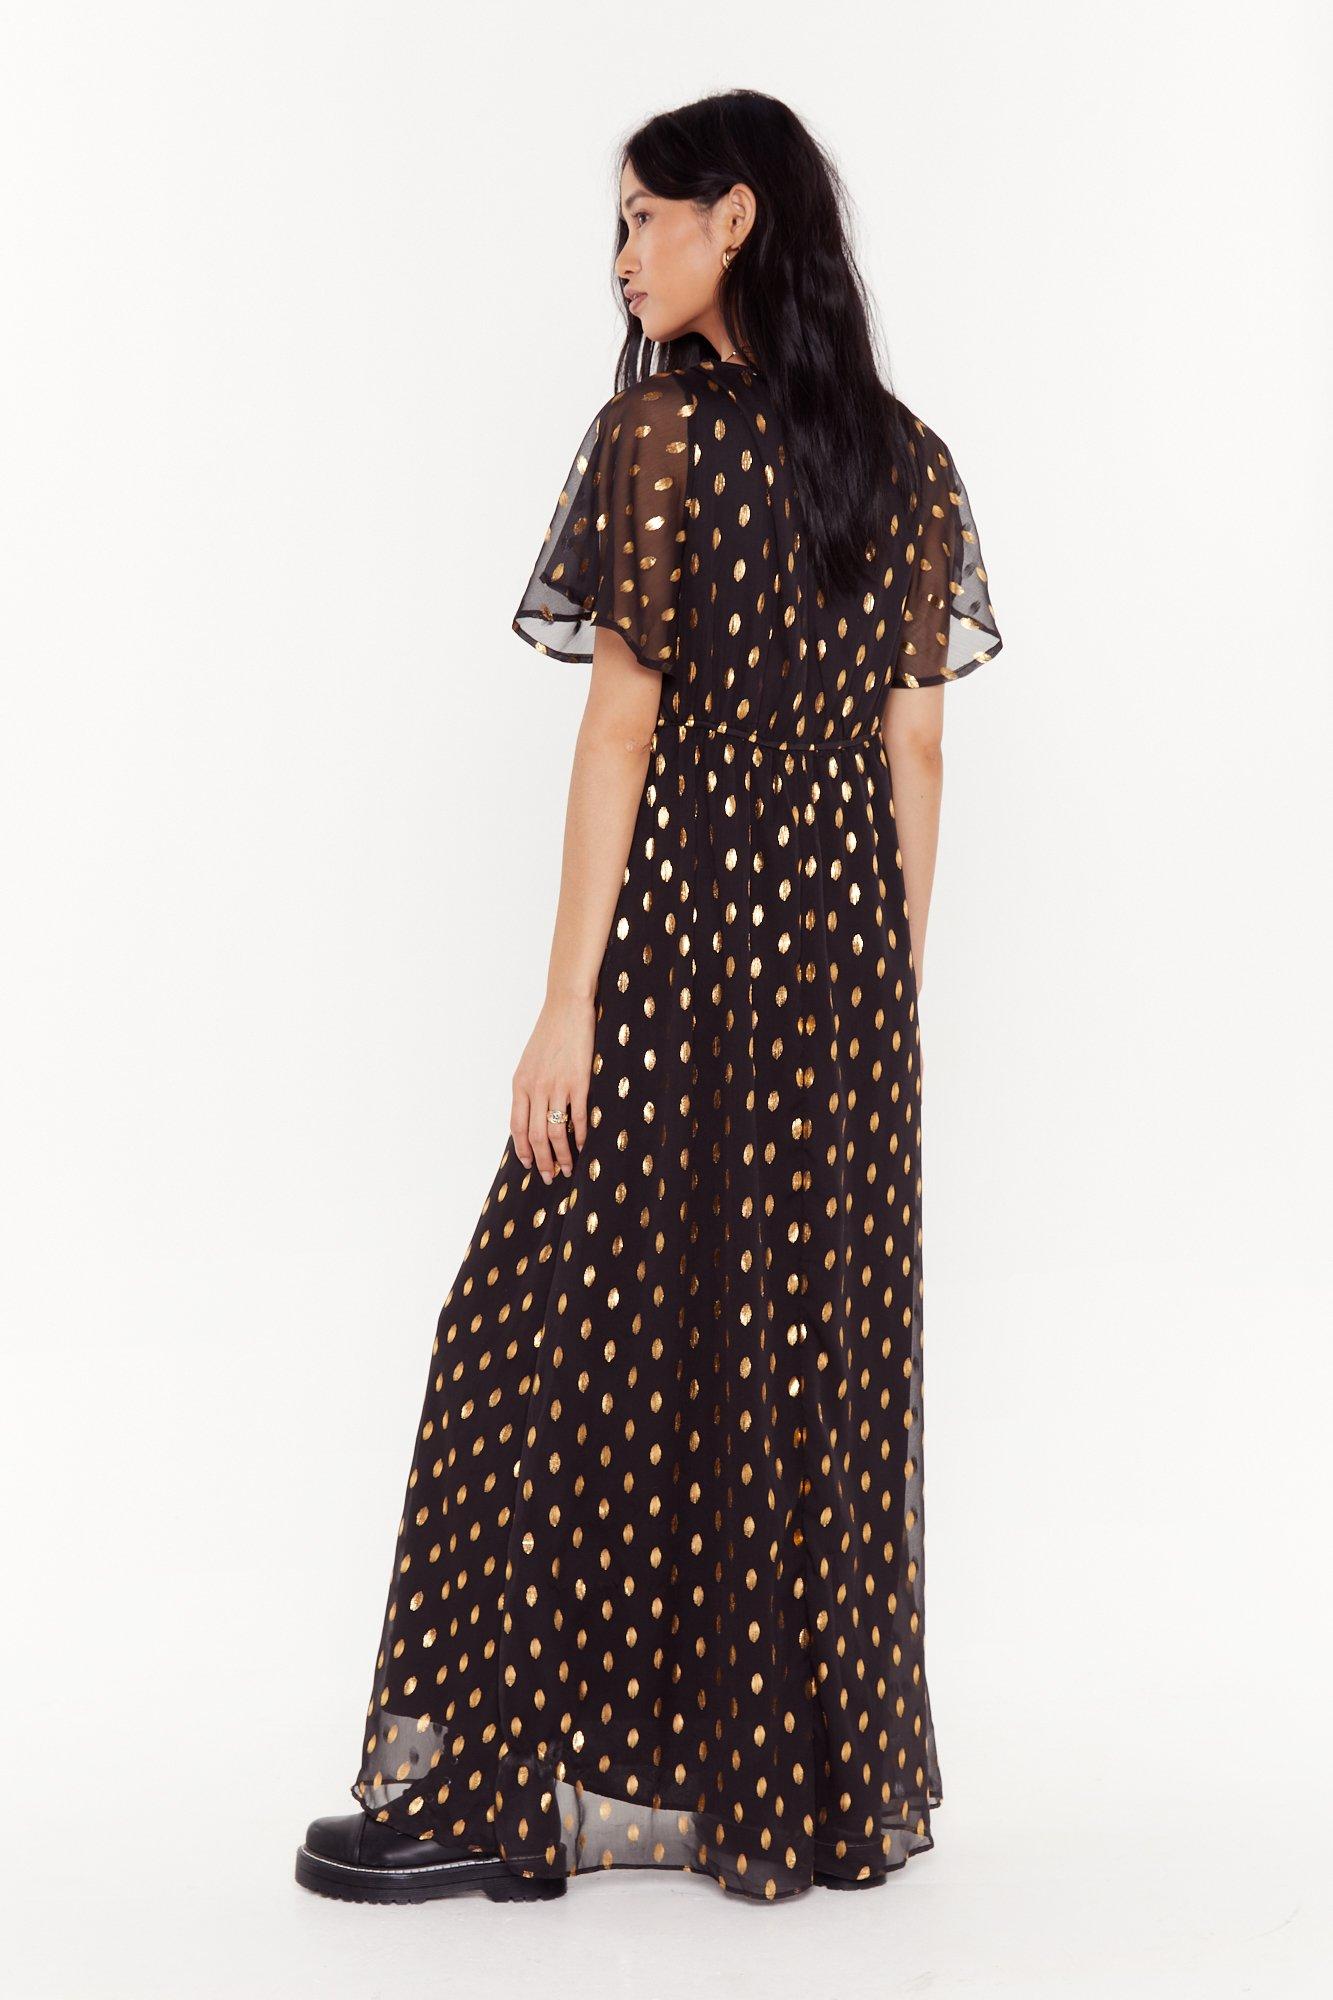 zara embroidered lace dress